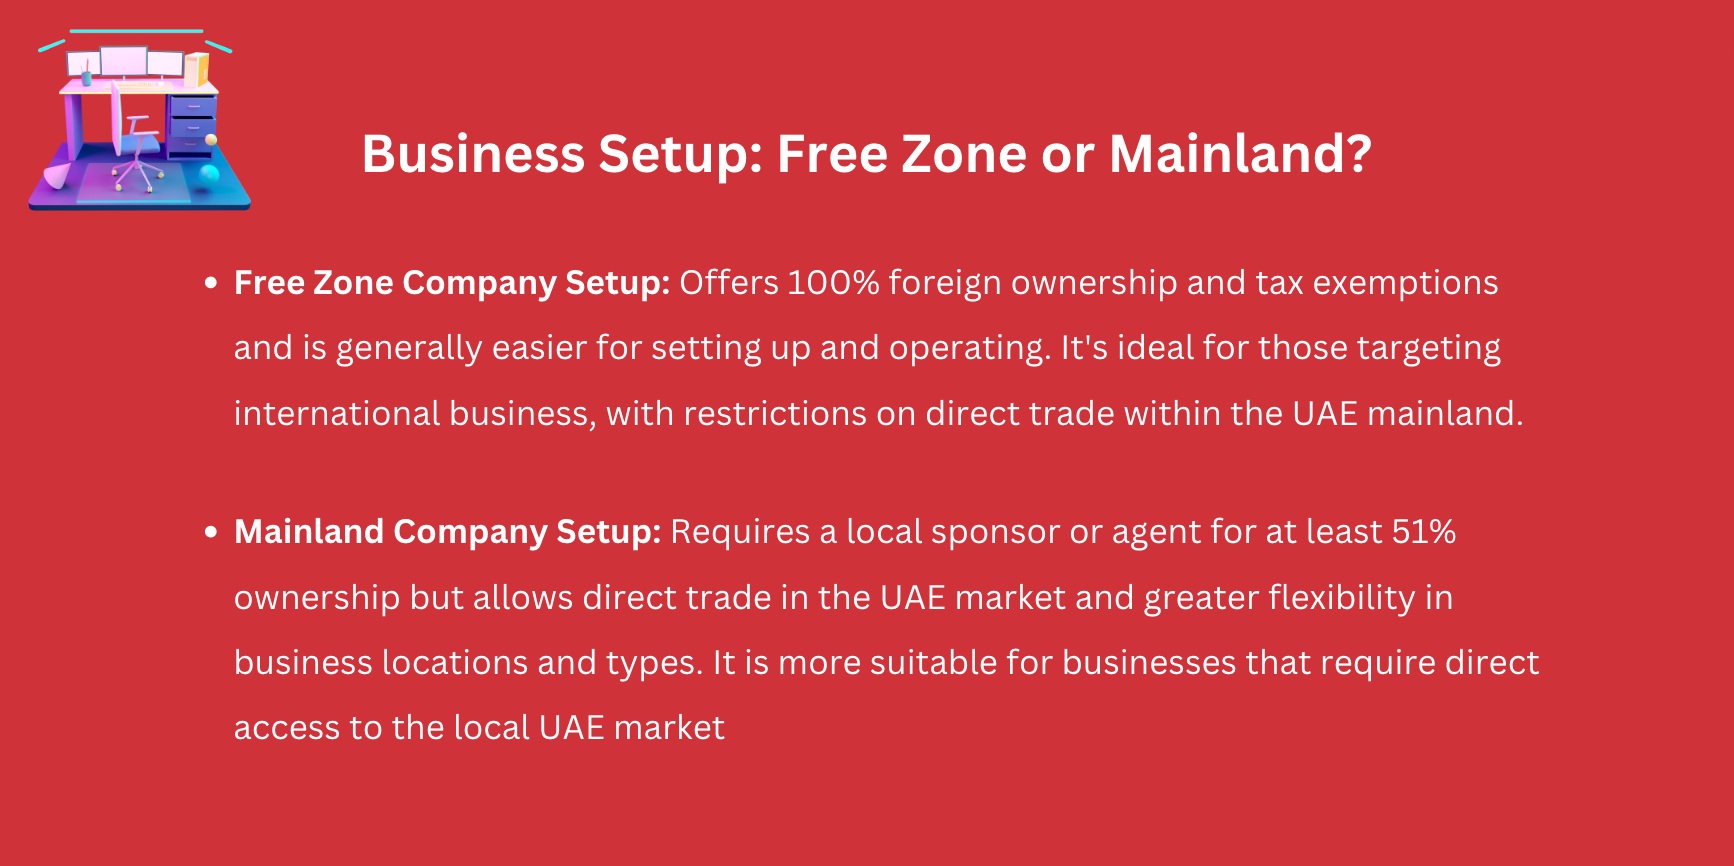 A comparison of free zone company set up and mainland company set up, in the UAE.